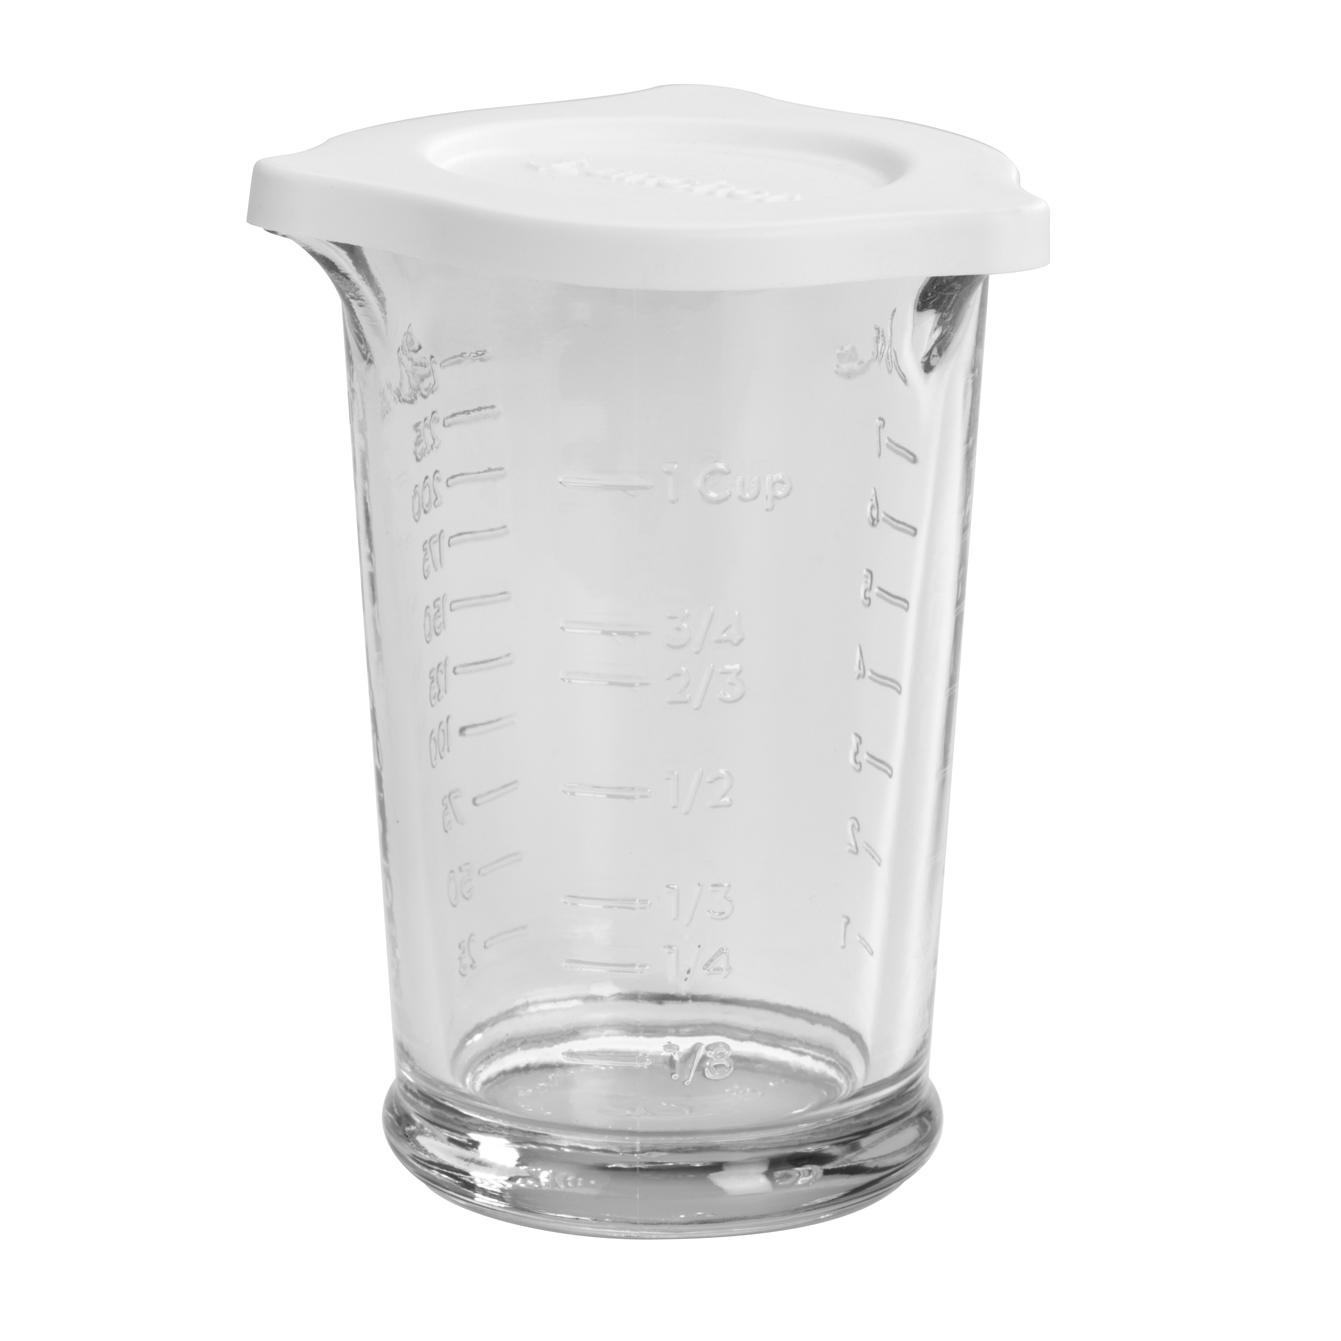 Anchor Hocking 8-Ounce Triple Pour Measuring Cup Renewed 